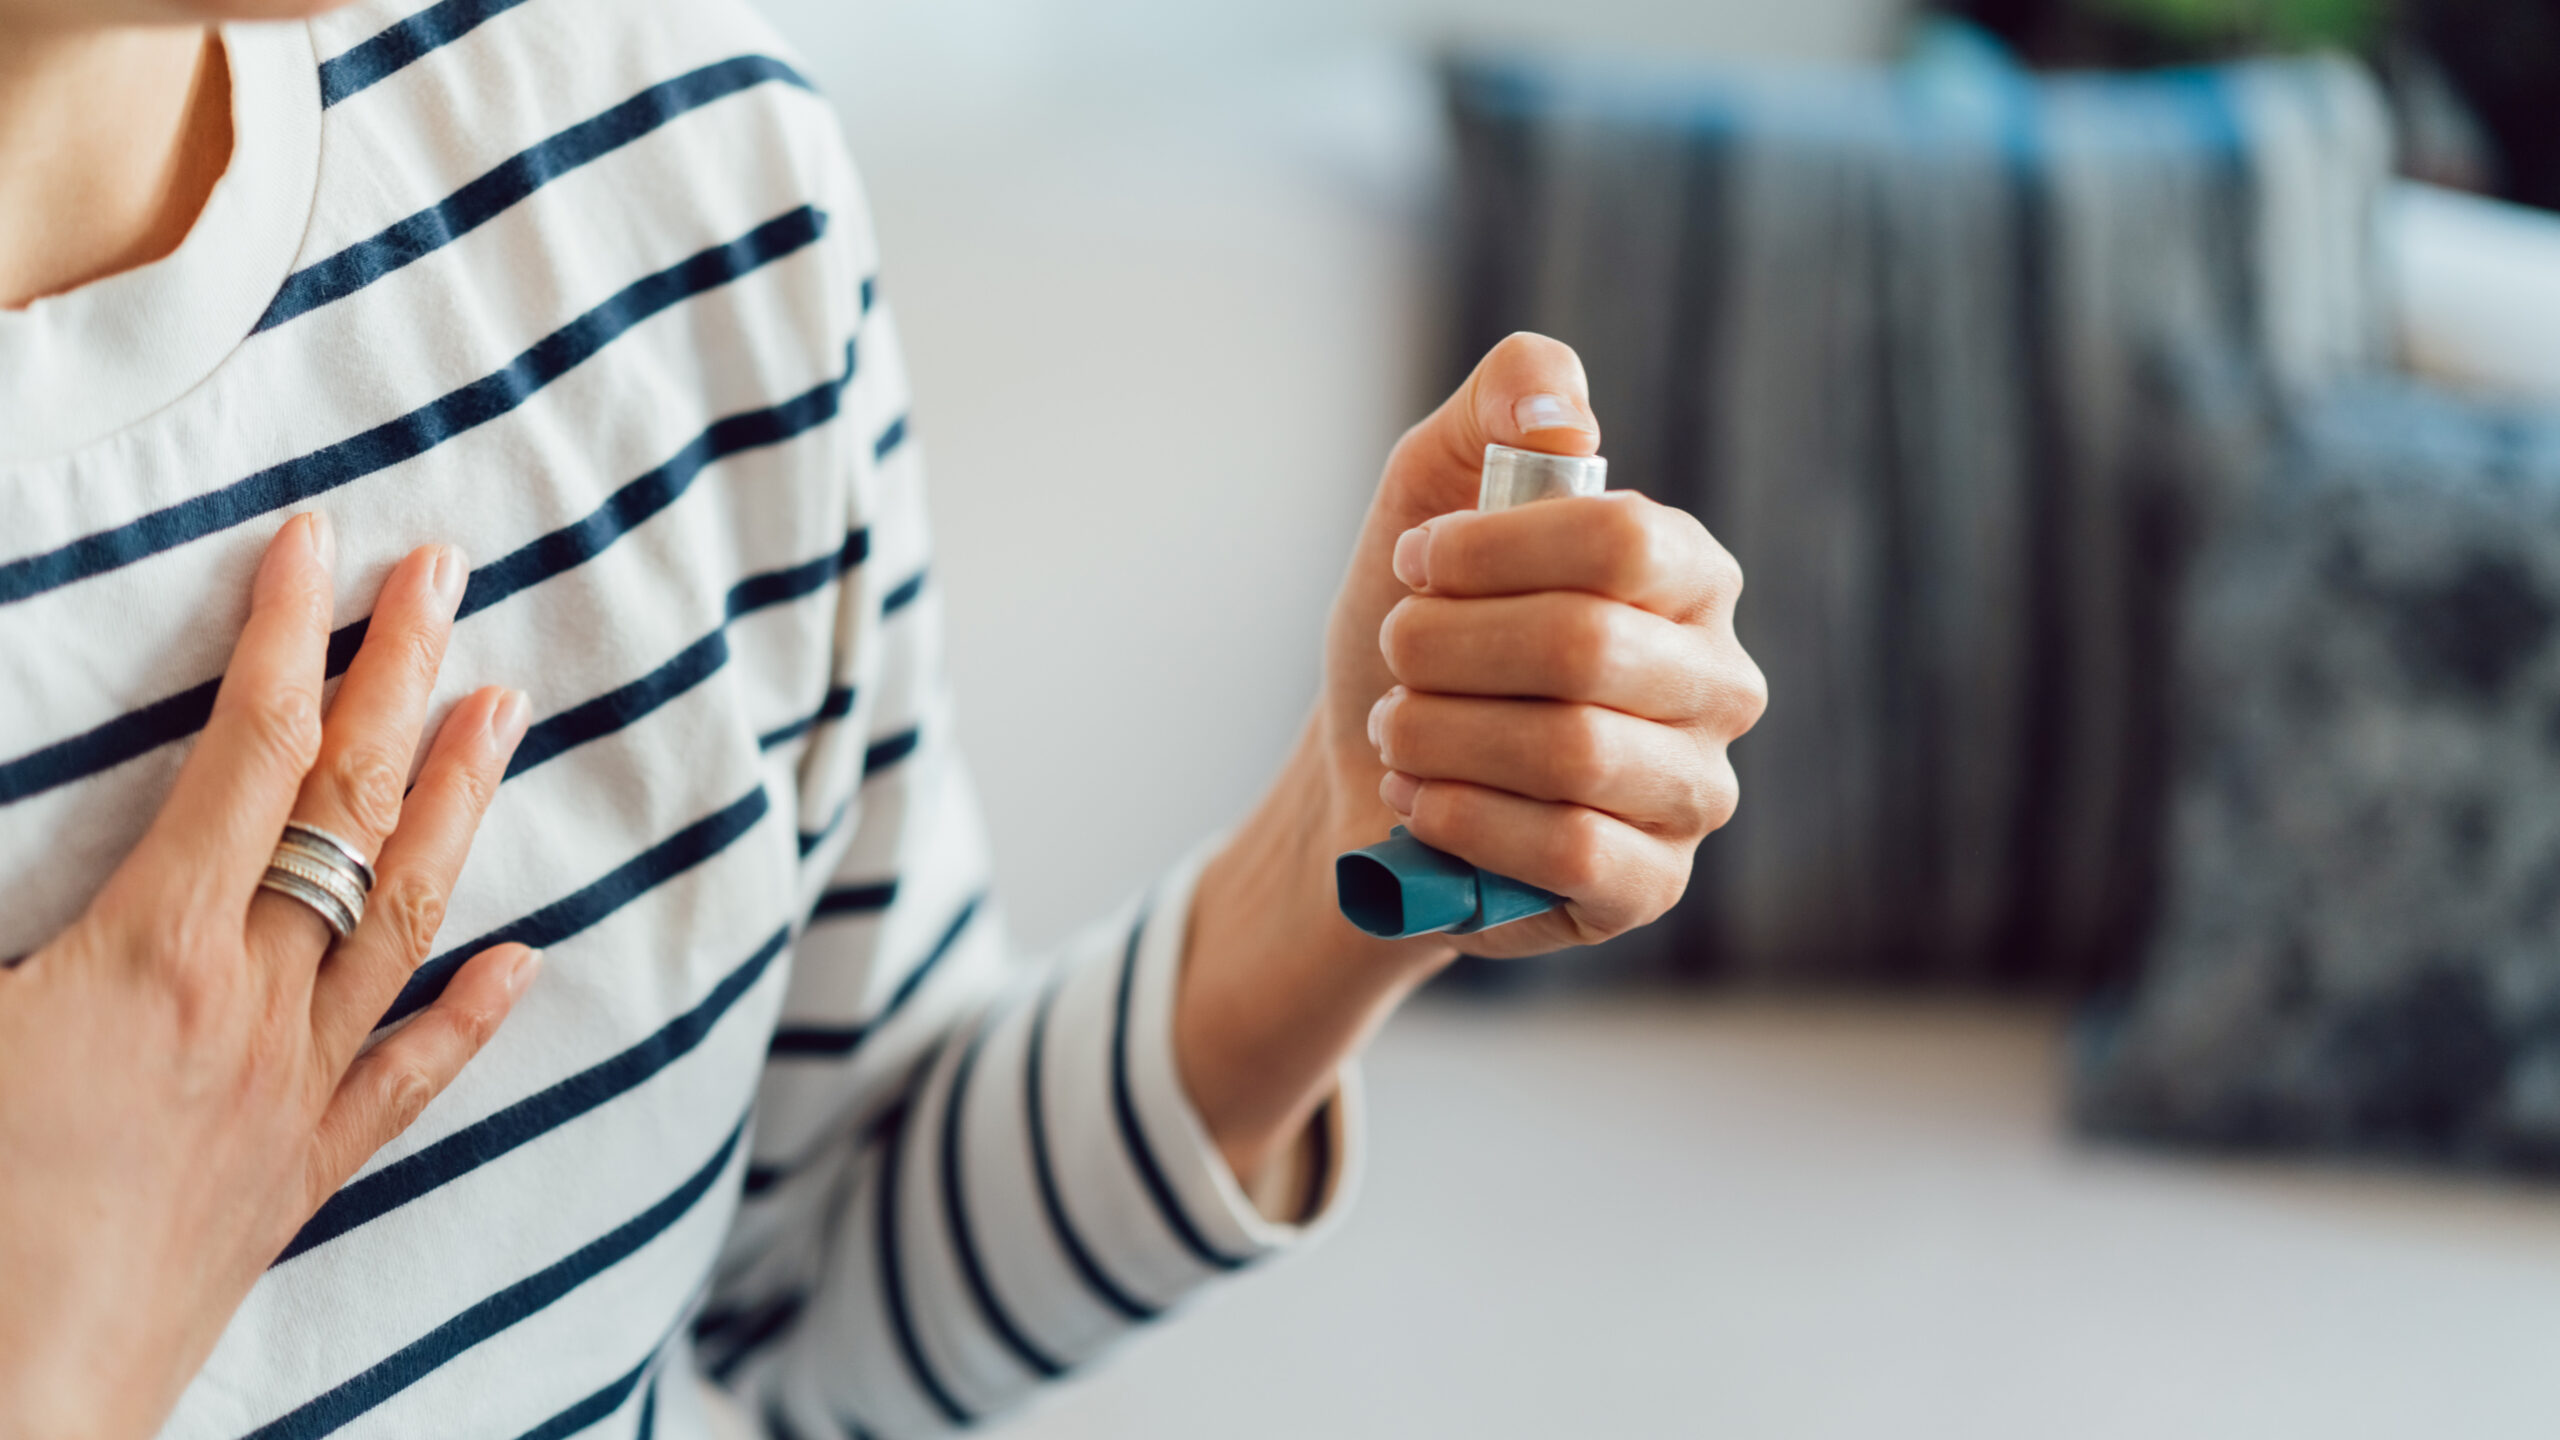 A popular asthma inhaler is leaving pharmacy shelves. Here’s what you need to know